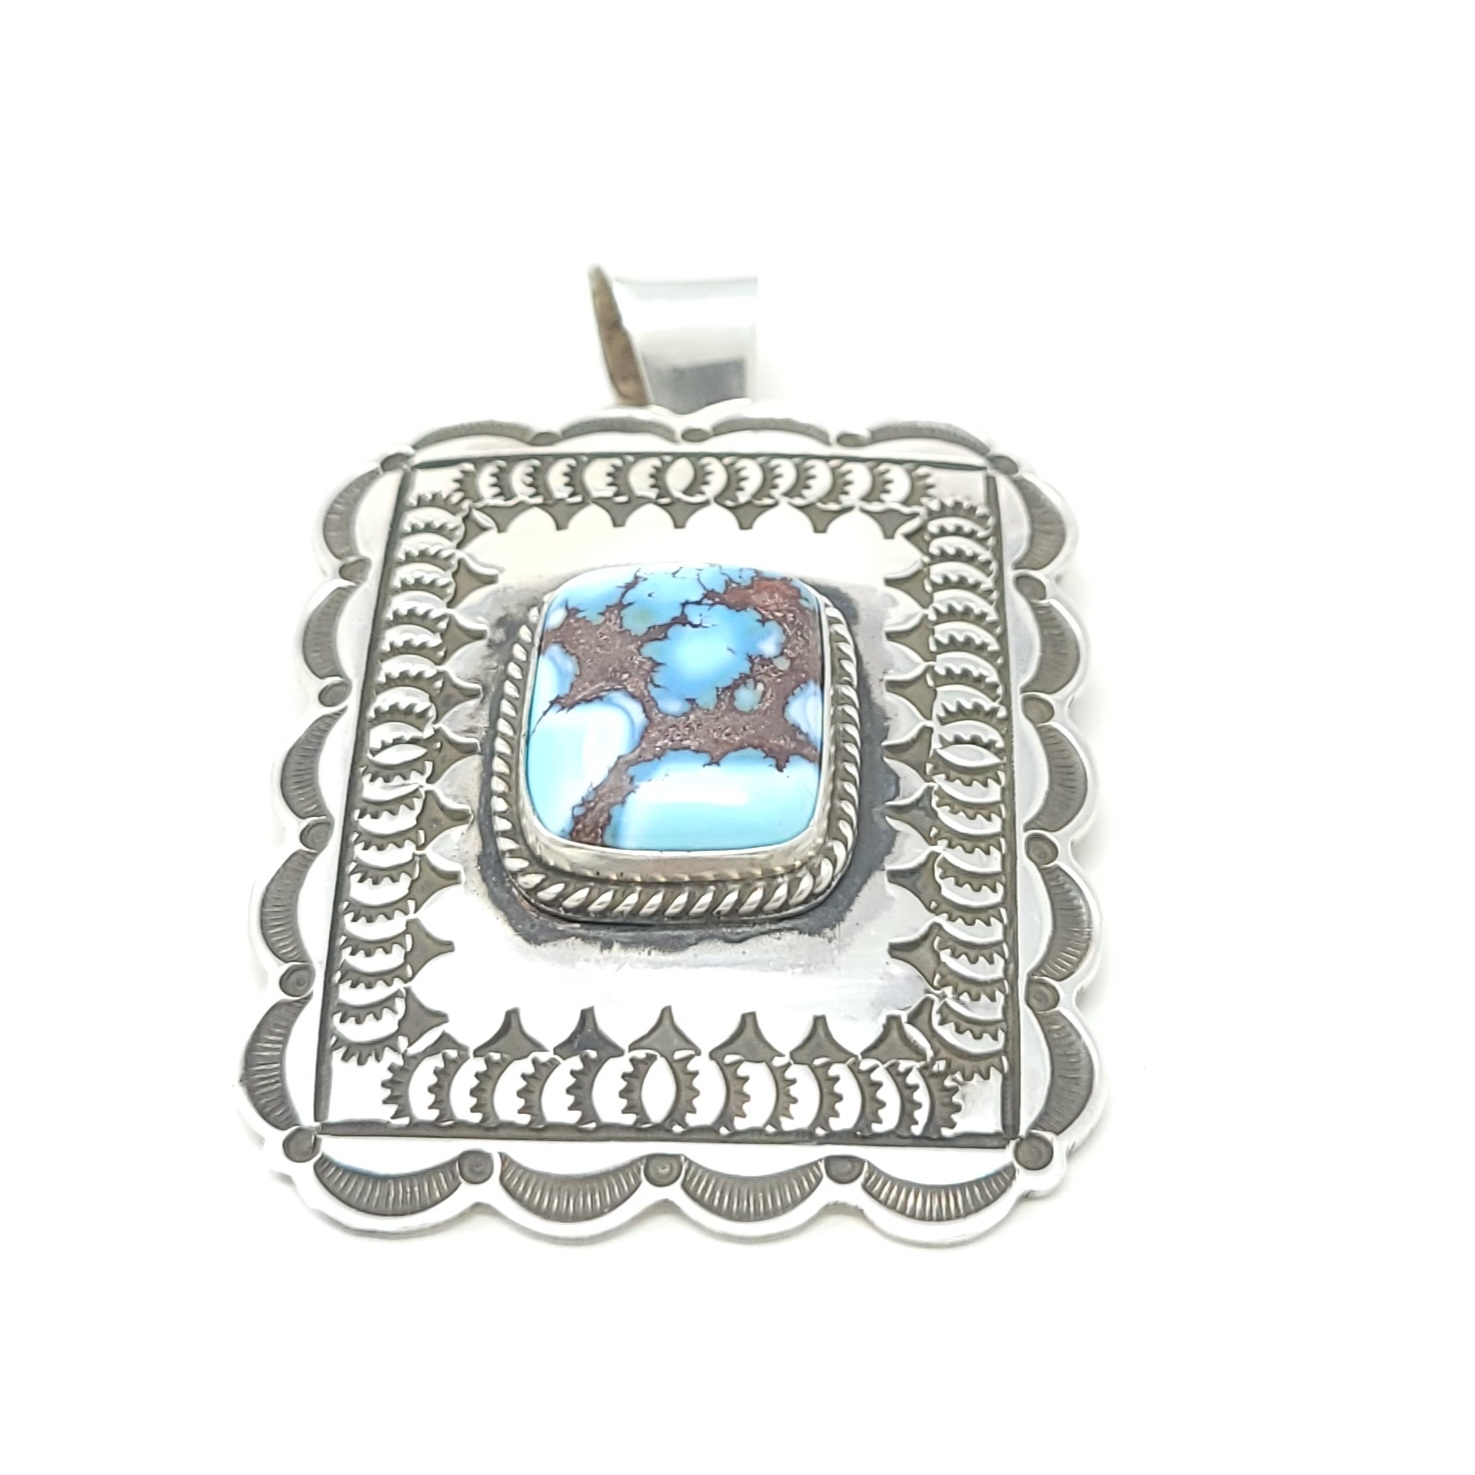 Andy Cadman Navajo Sterling Silver Concho Style Pendant Golden Hill Turquoise